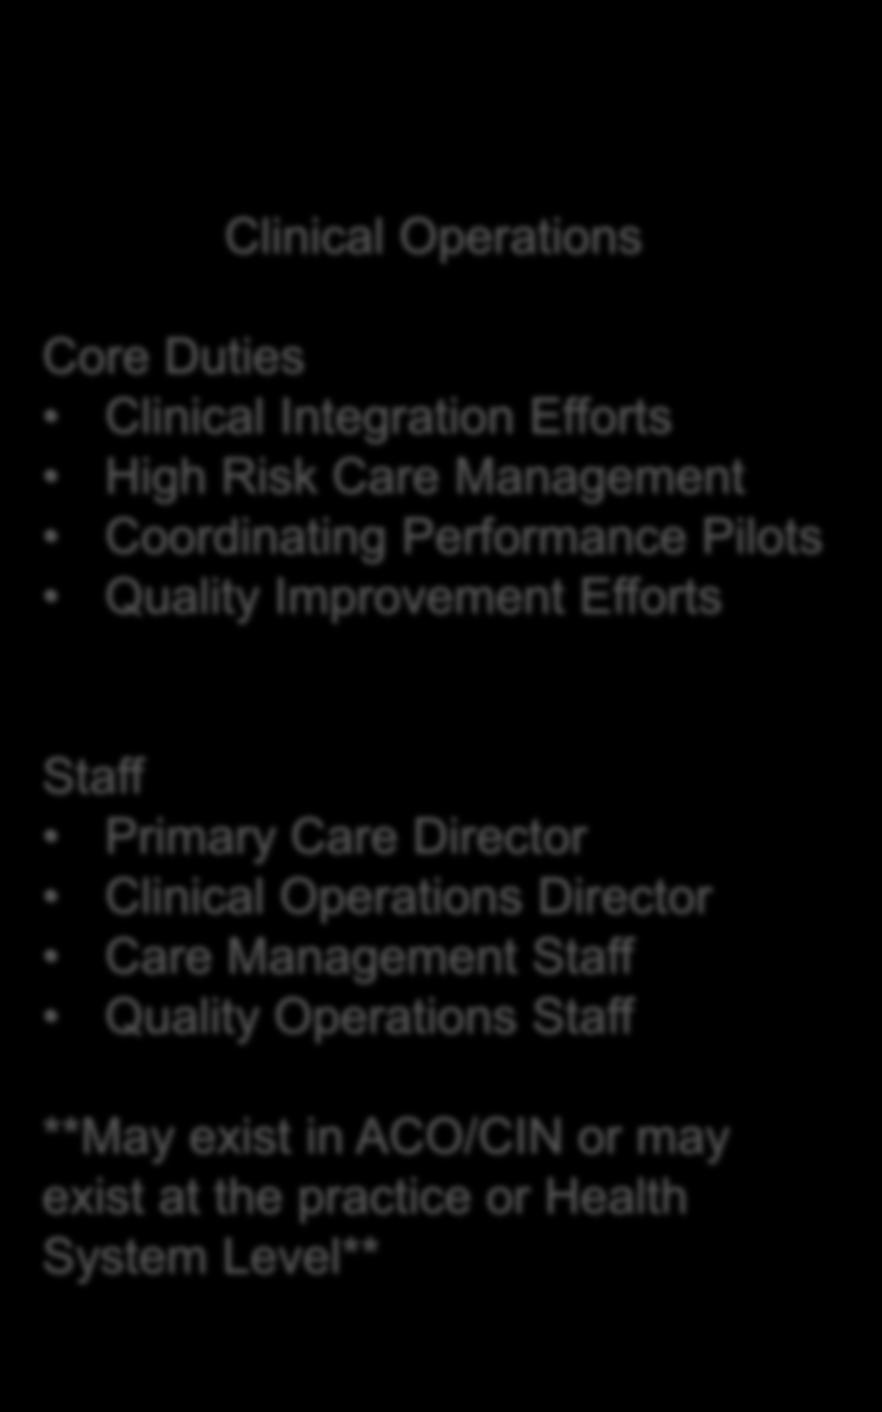 Performance Pilots Quality Improvement Efforts Staff Primary Care Director Clinical Operations Director